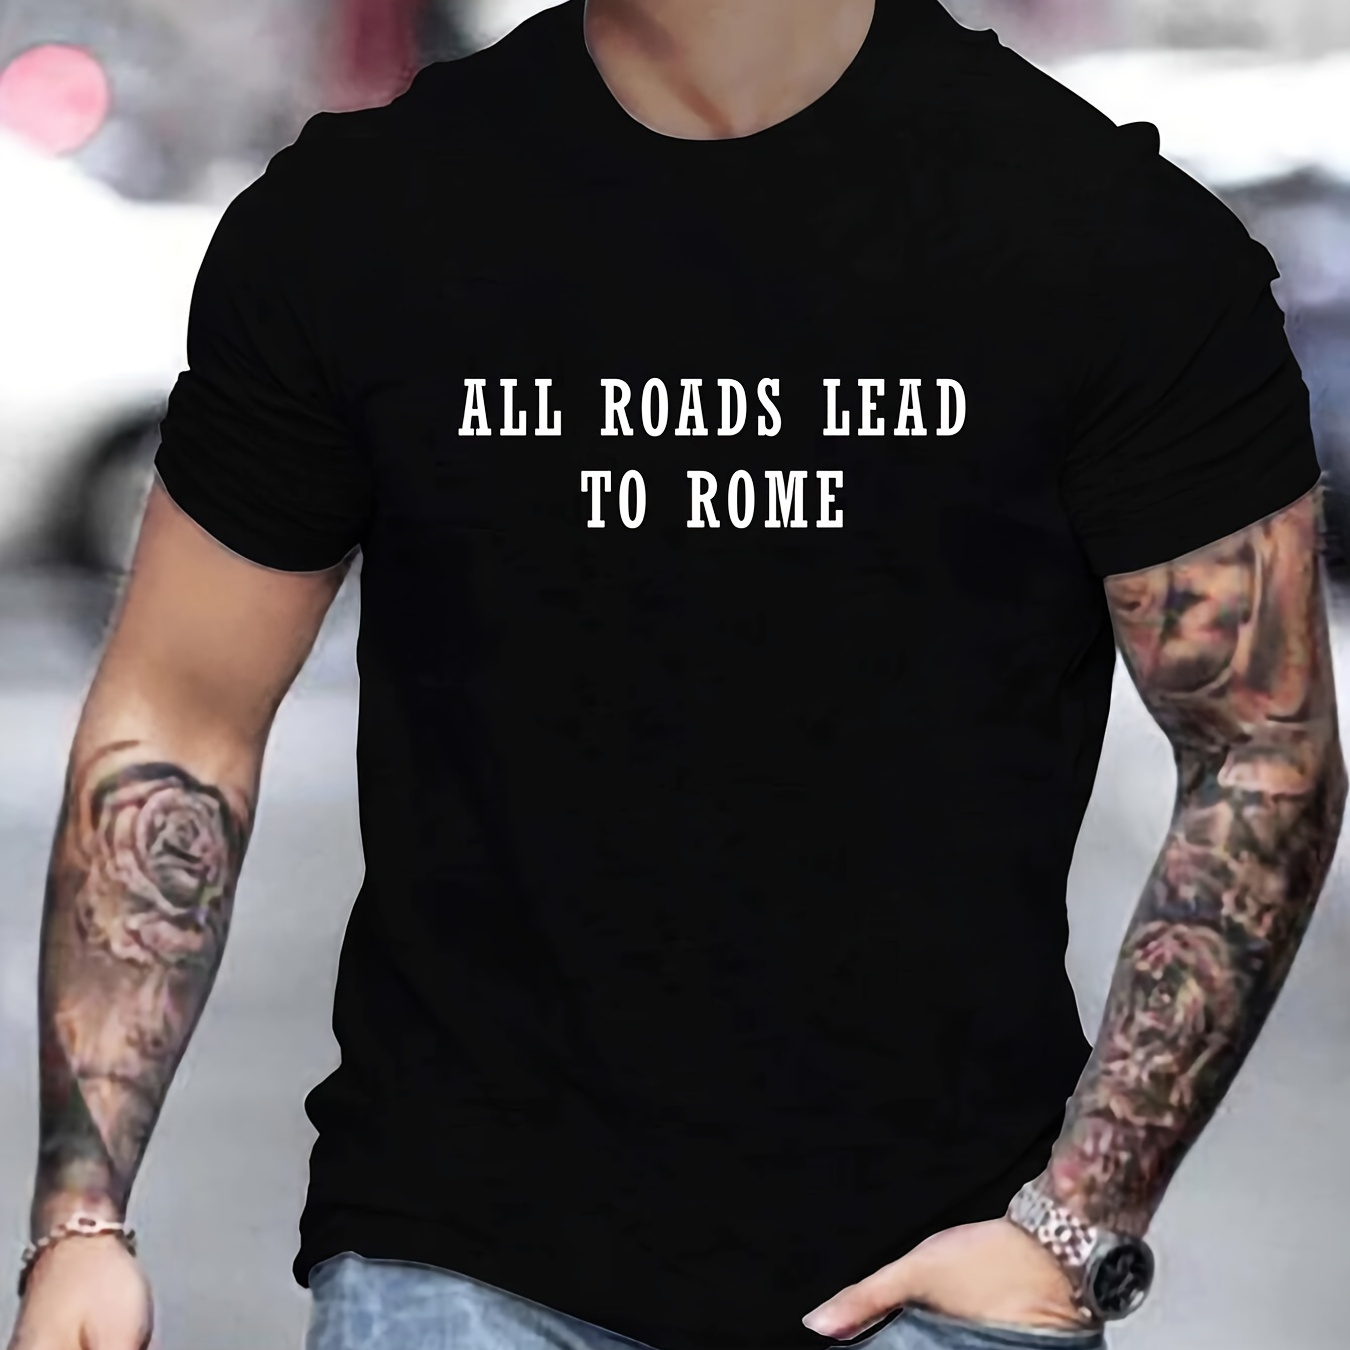 

'all Roads Lead To Rome' Pattern Tee, Men's Casual Crew Neck T-shirt For Spring And Summer